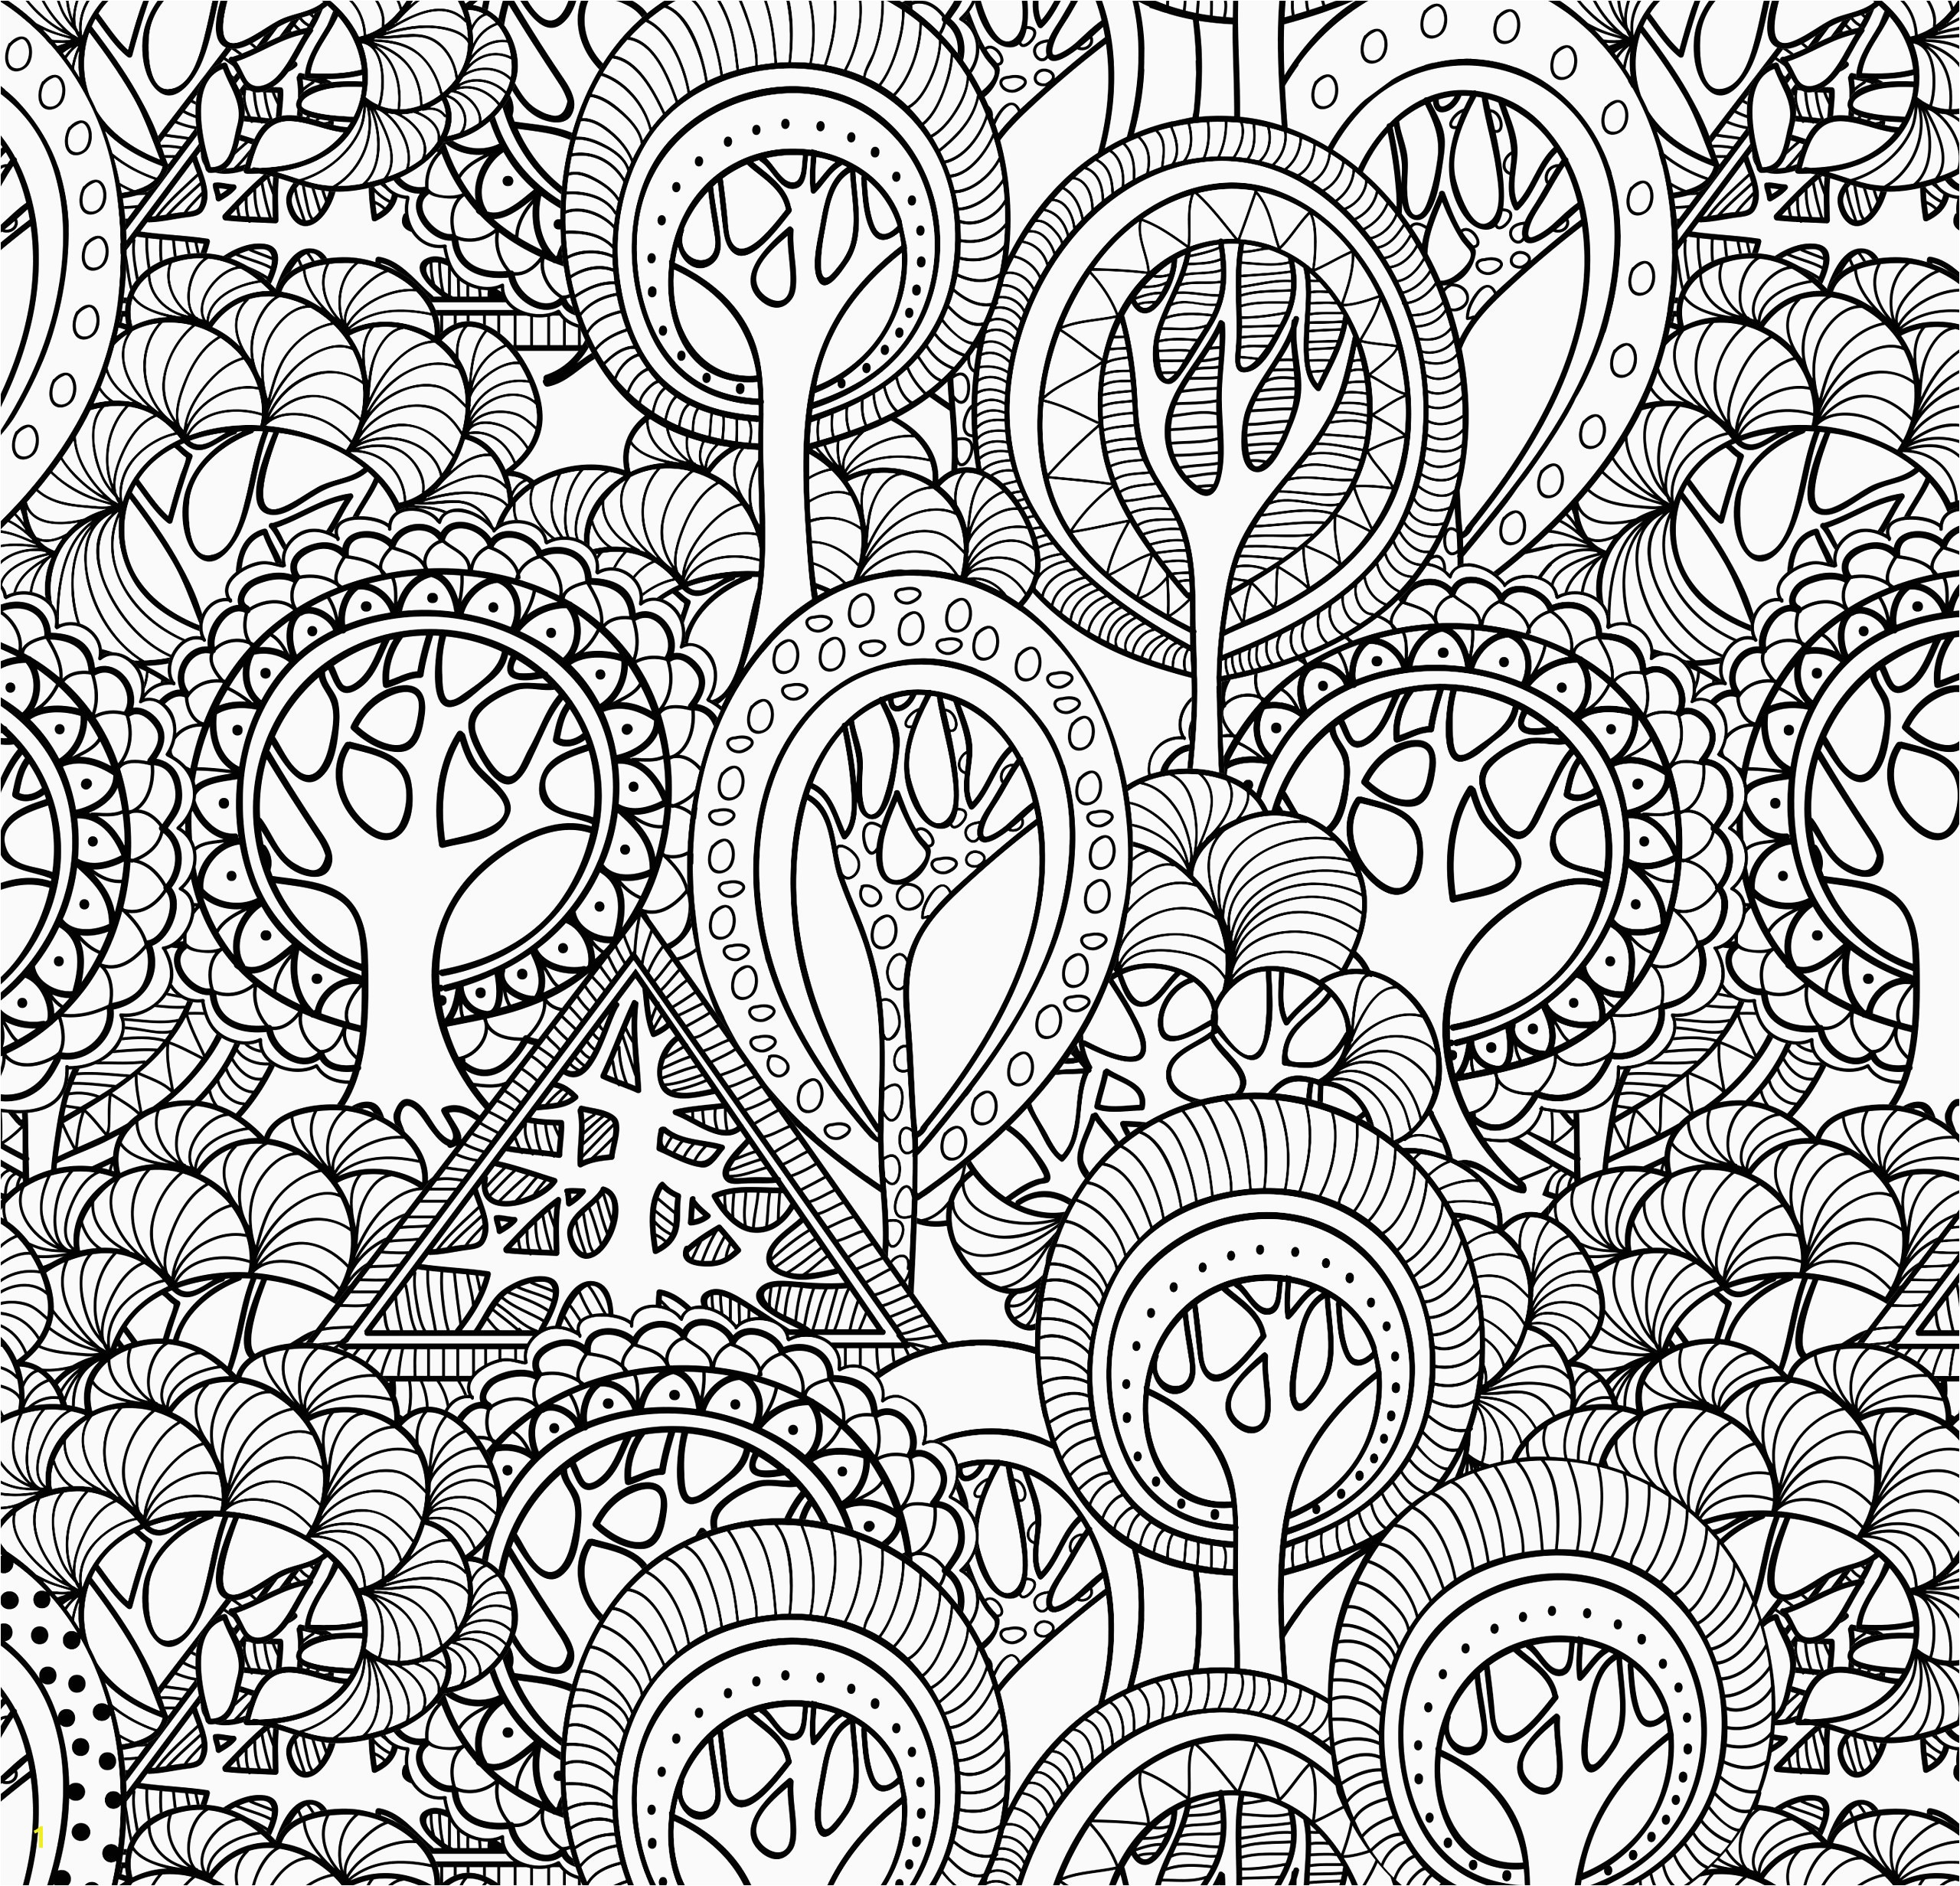 Aztec Pattern Coloring Pages Puzzle Coloring Pages Beautiful Print Free Mandala to Color Maze